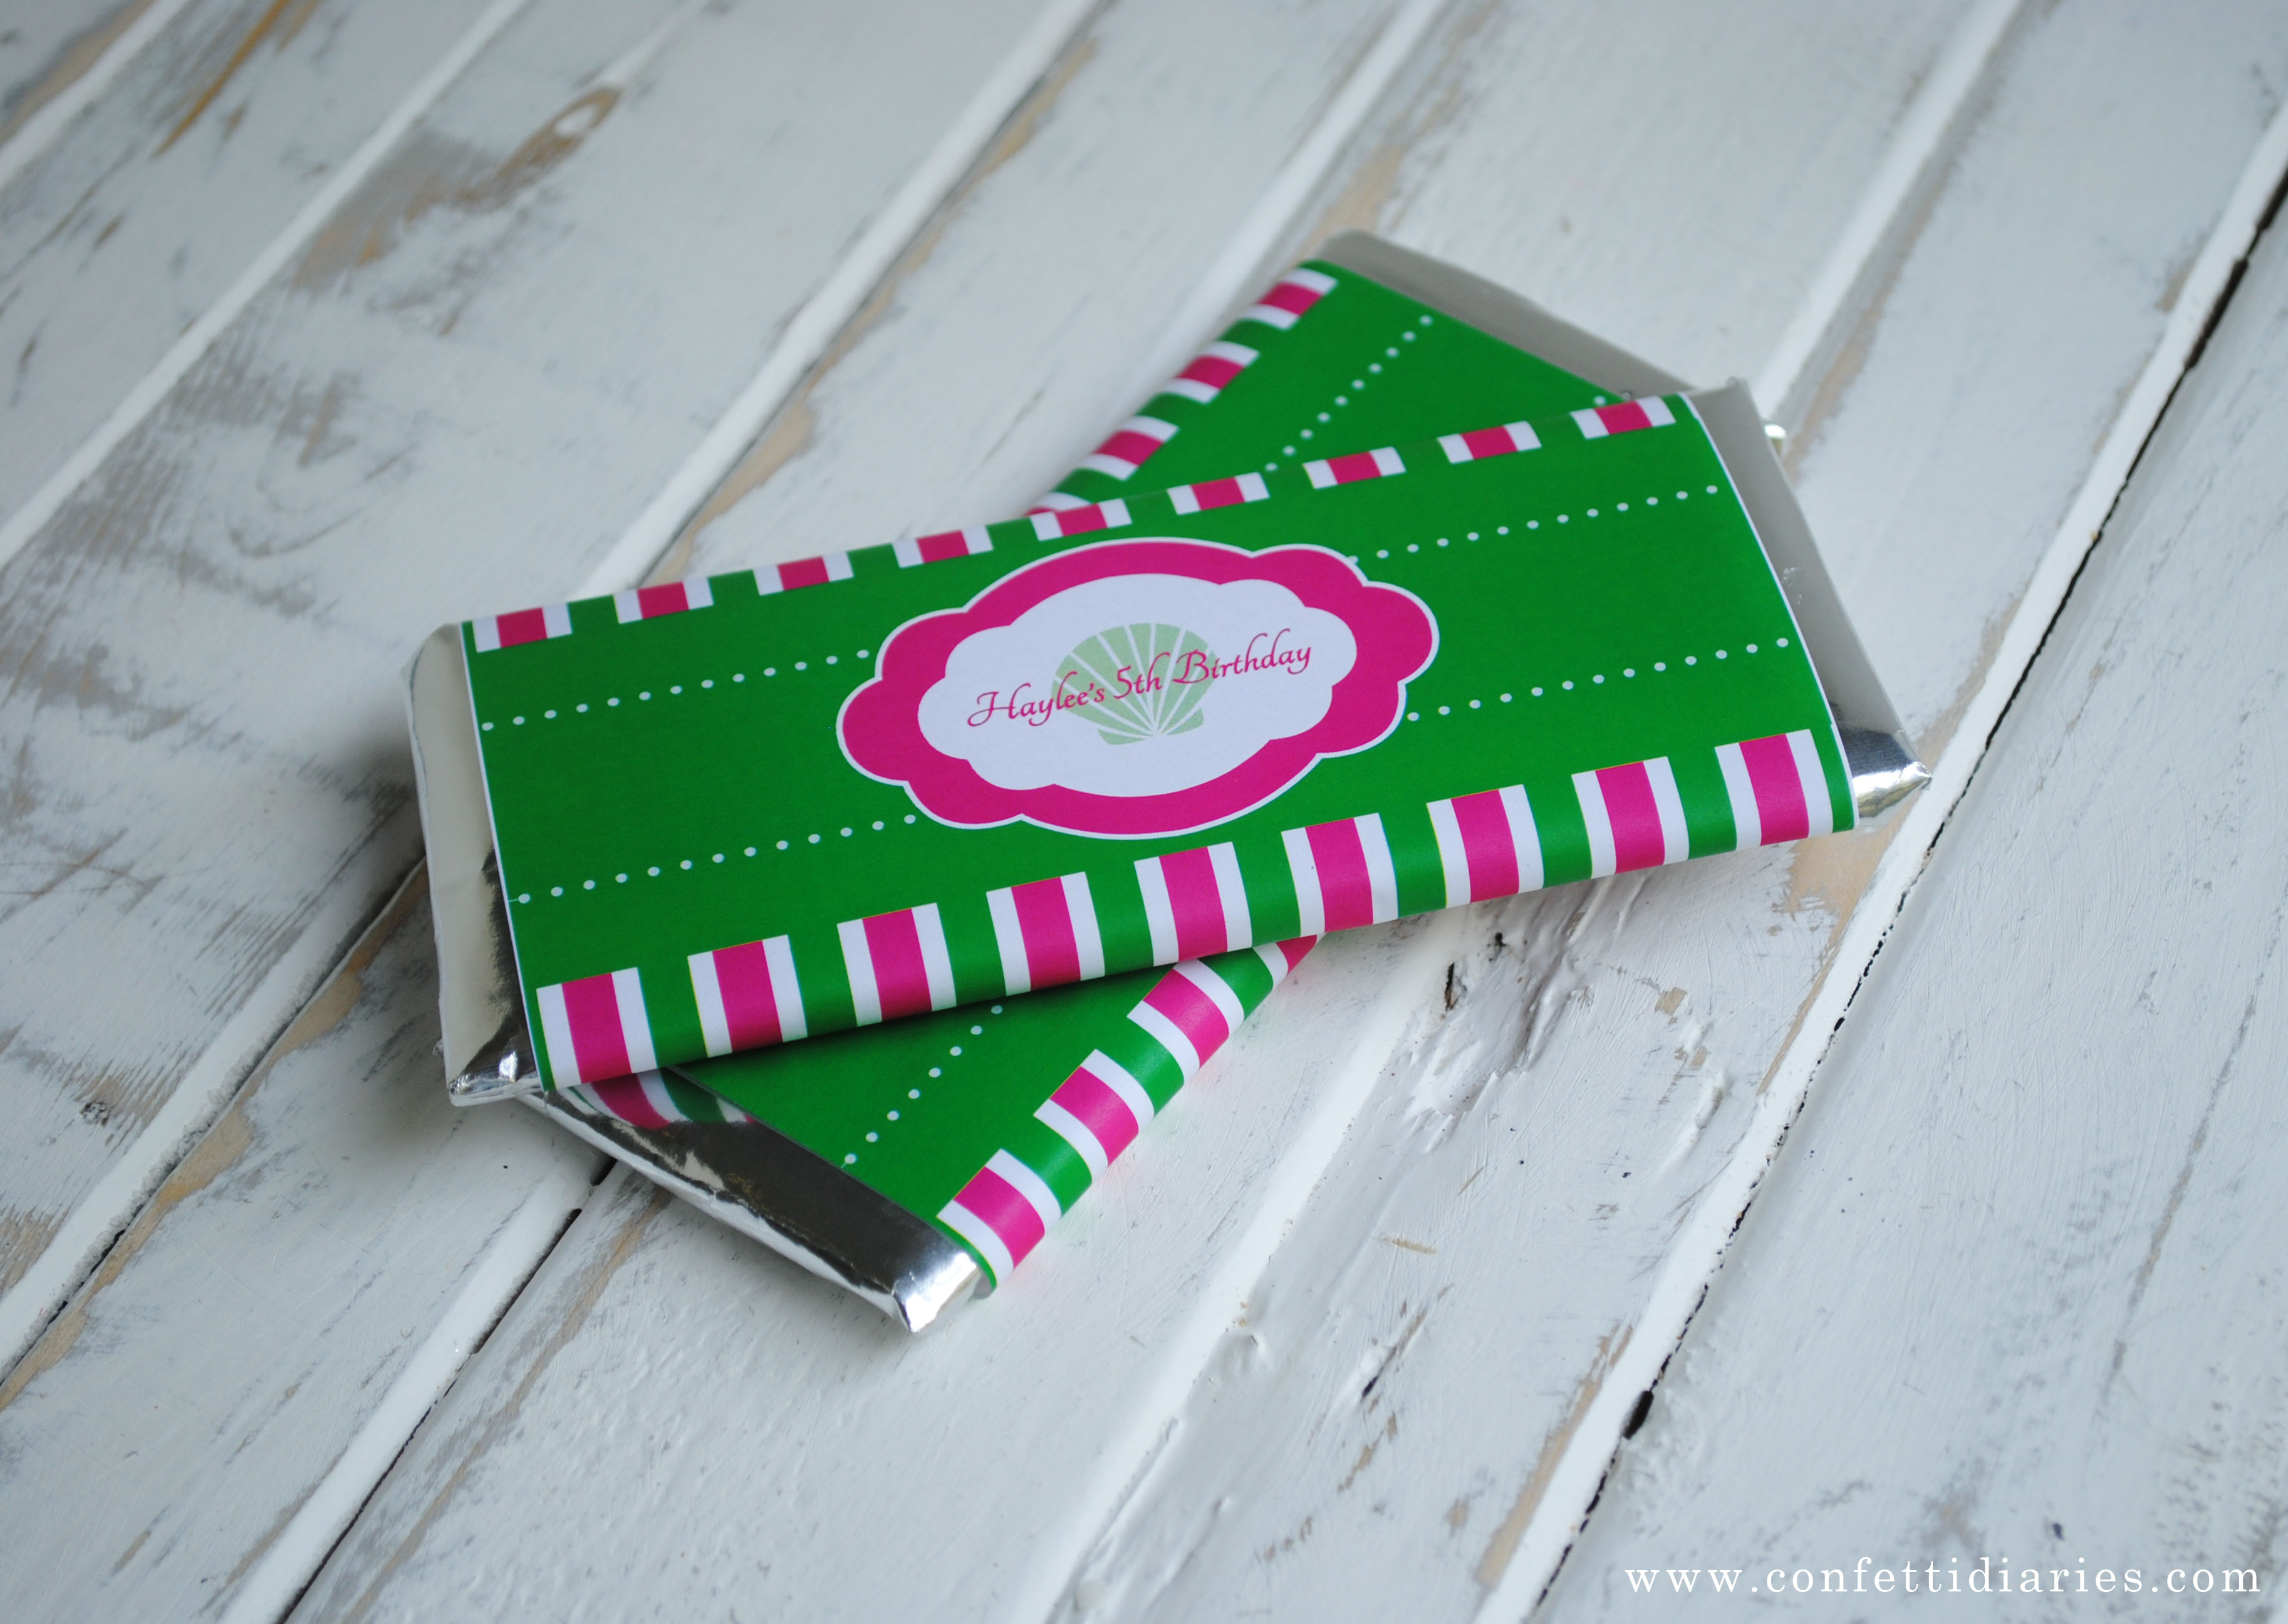 6 Best Images of Free Printable Candy Wrapper Templates Chocolate